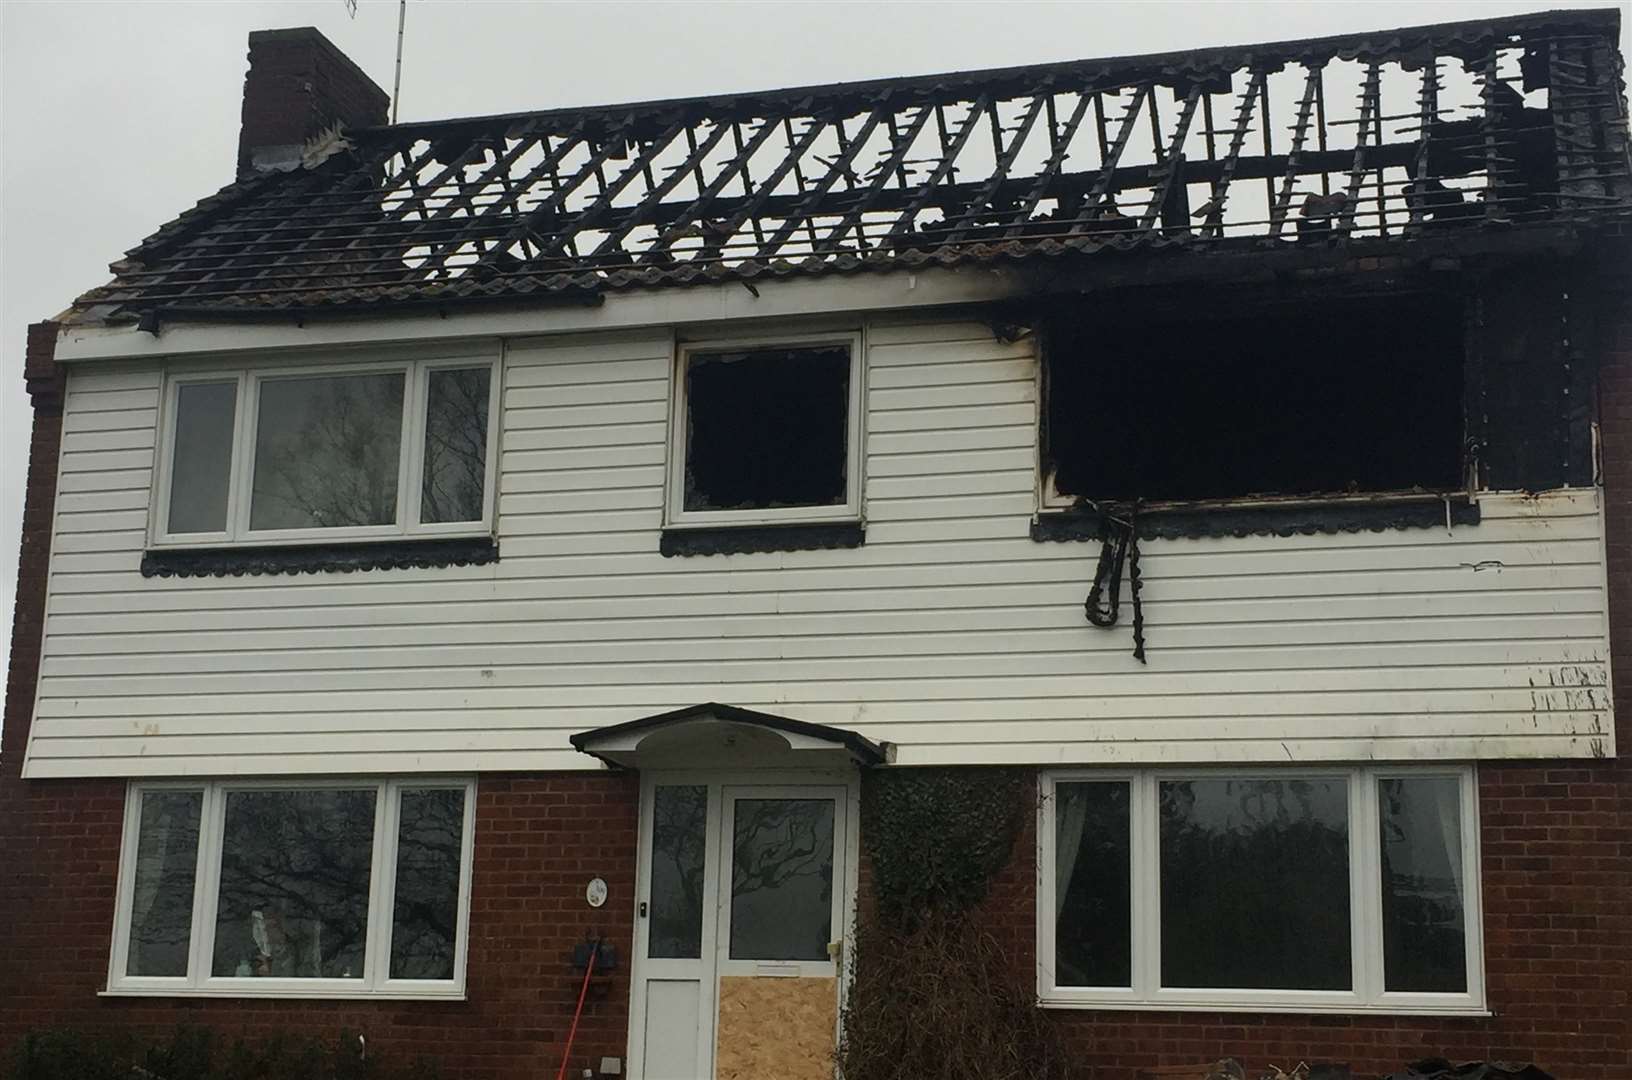 The house was severely damaged in the fire